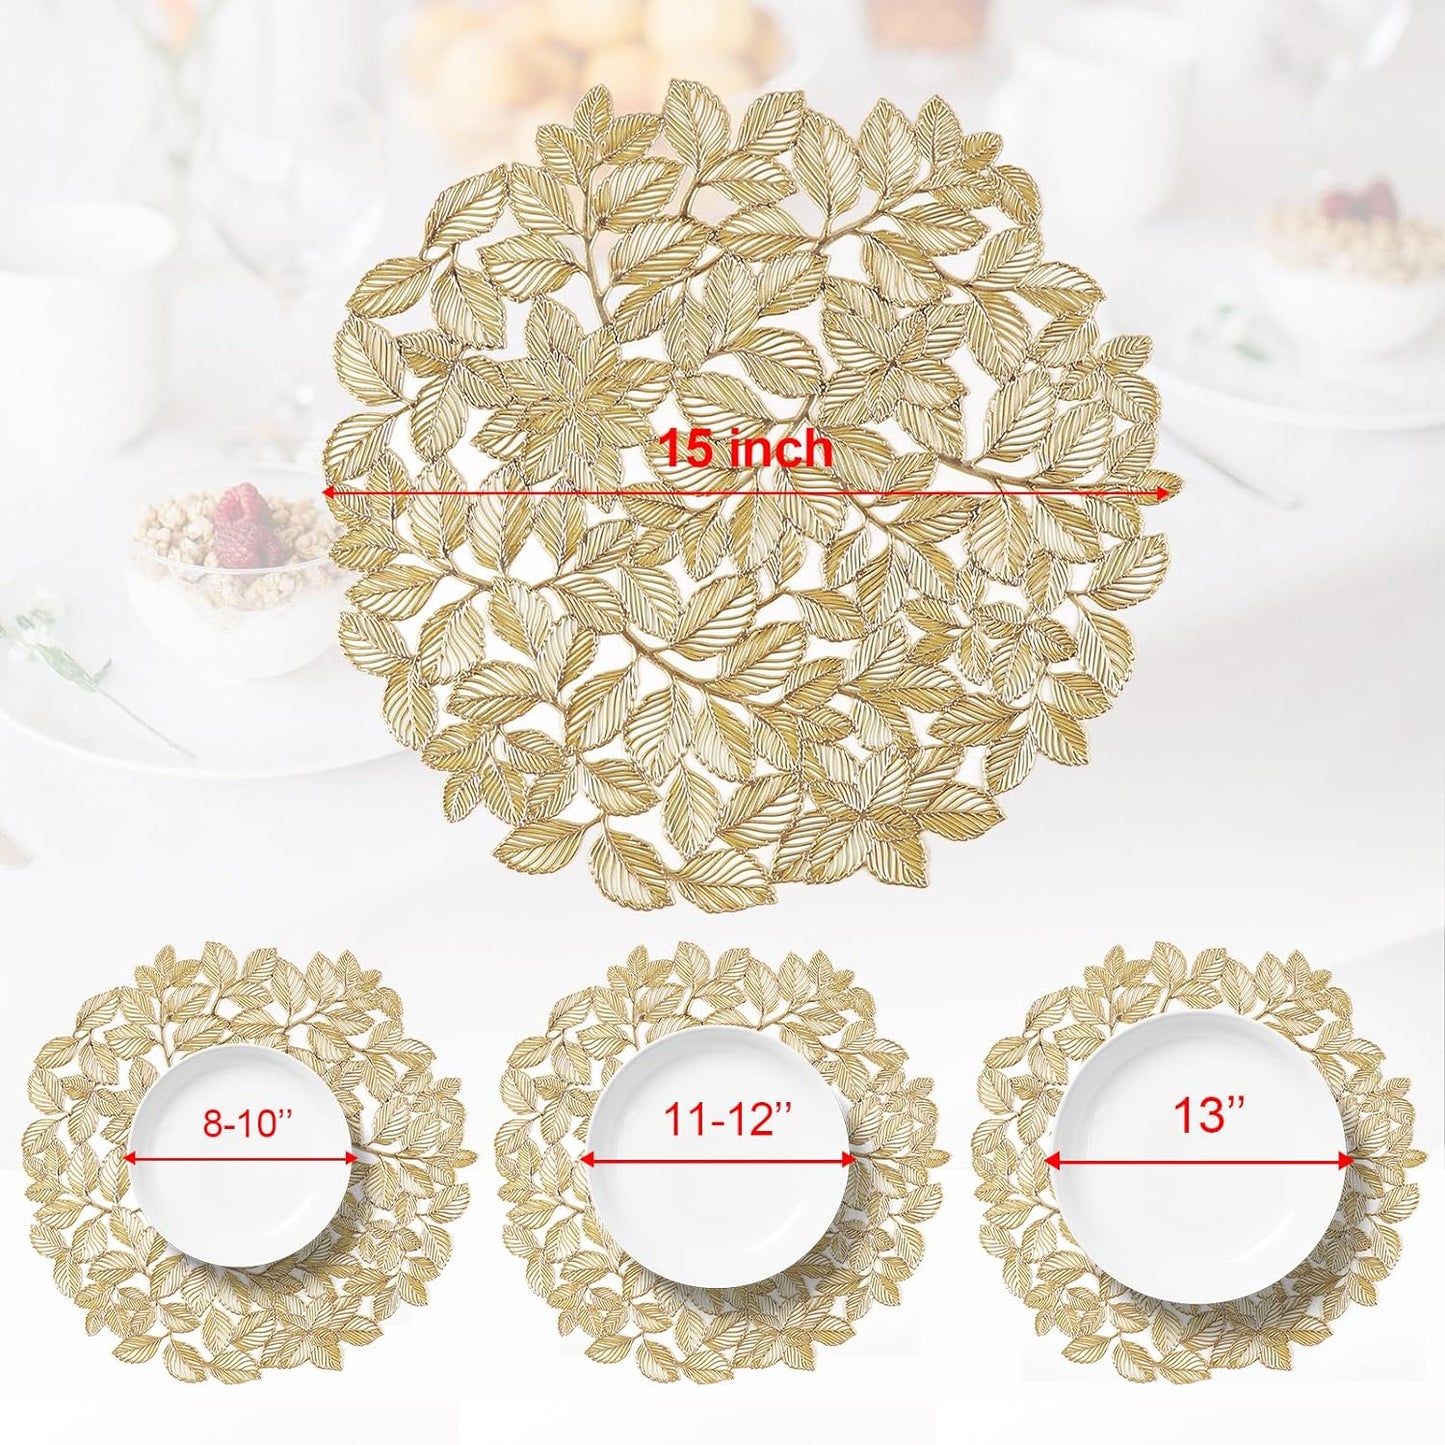 Round Gold Placemats Set of 12 Metallic Leaf Pressed Vinyl Table Dining Mats Waterproof Decorations Placemats for Gathering Housewarming Activities